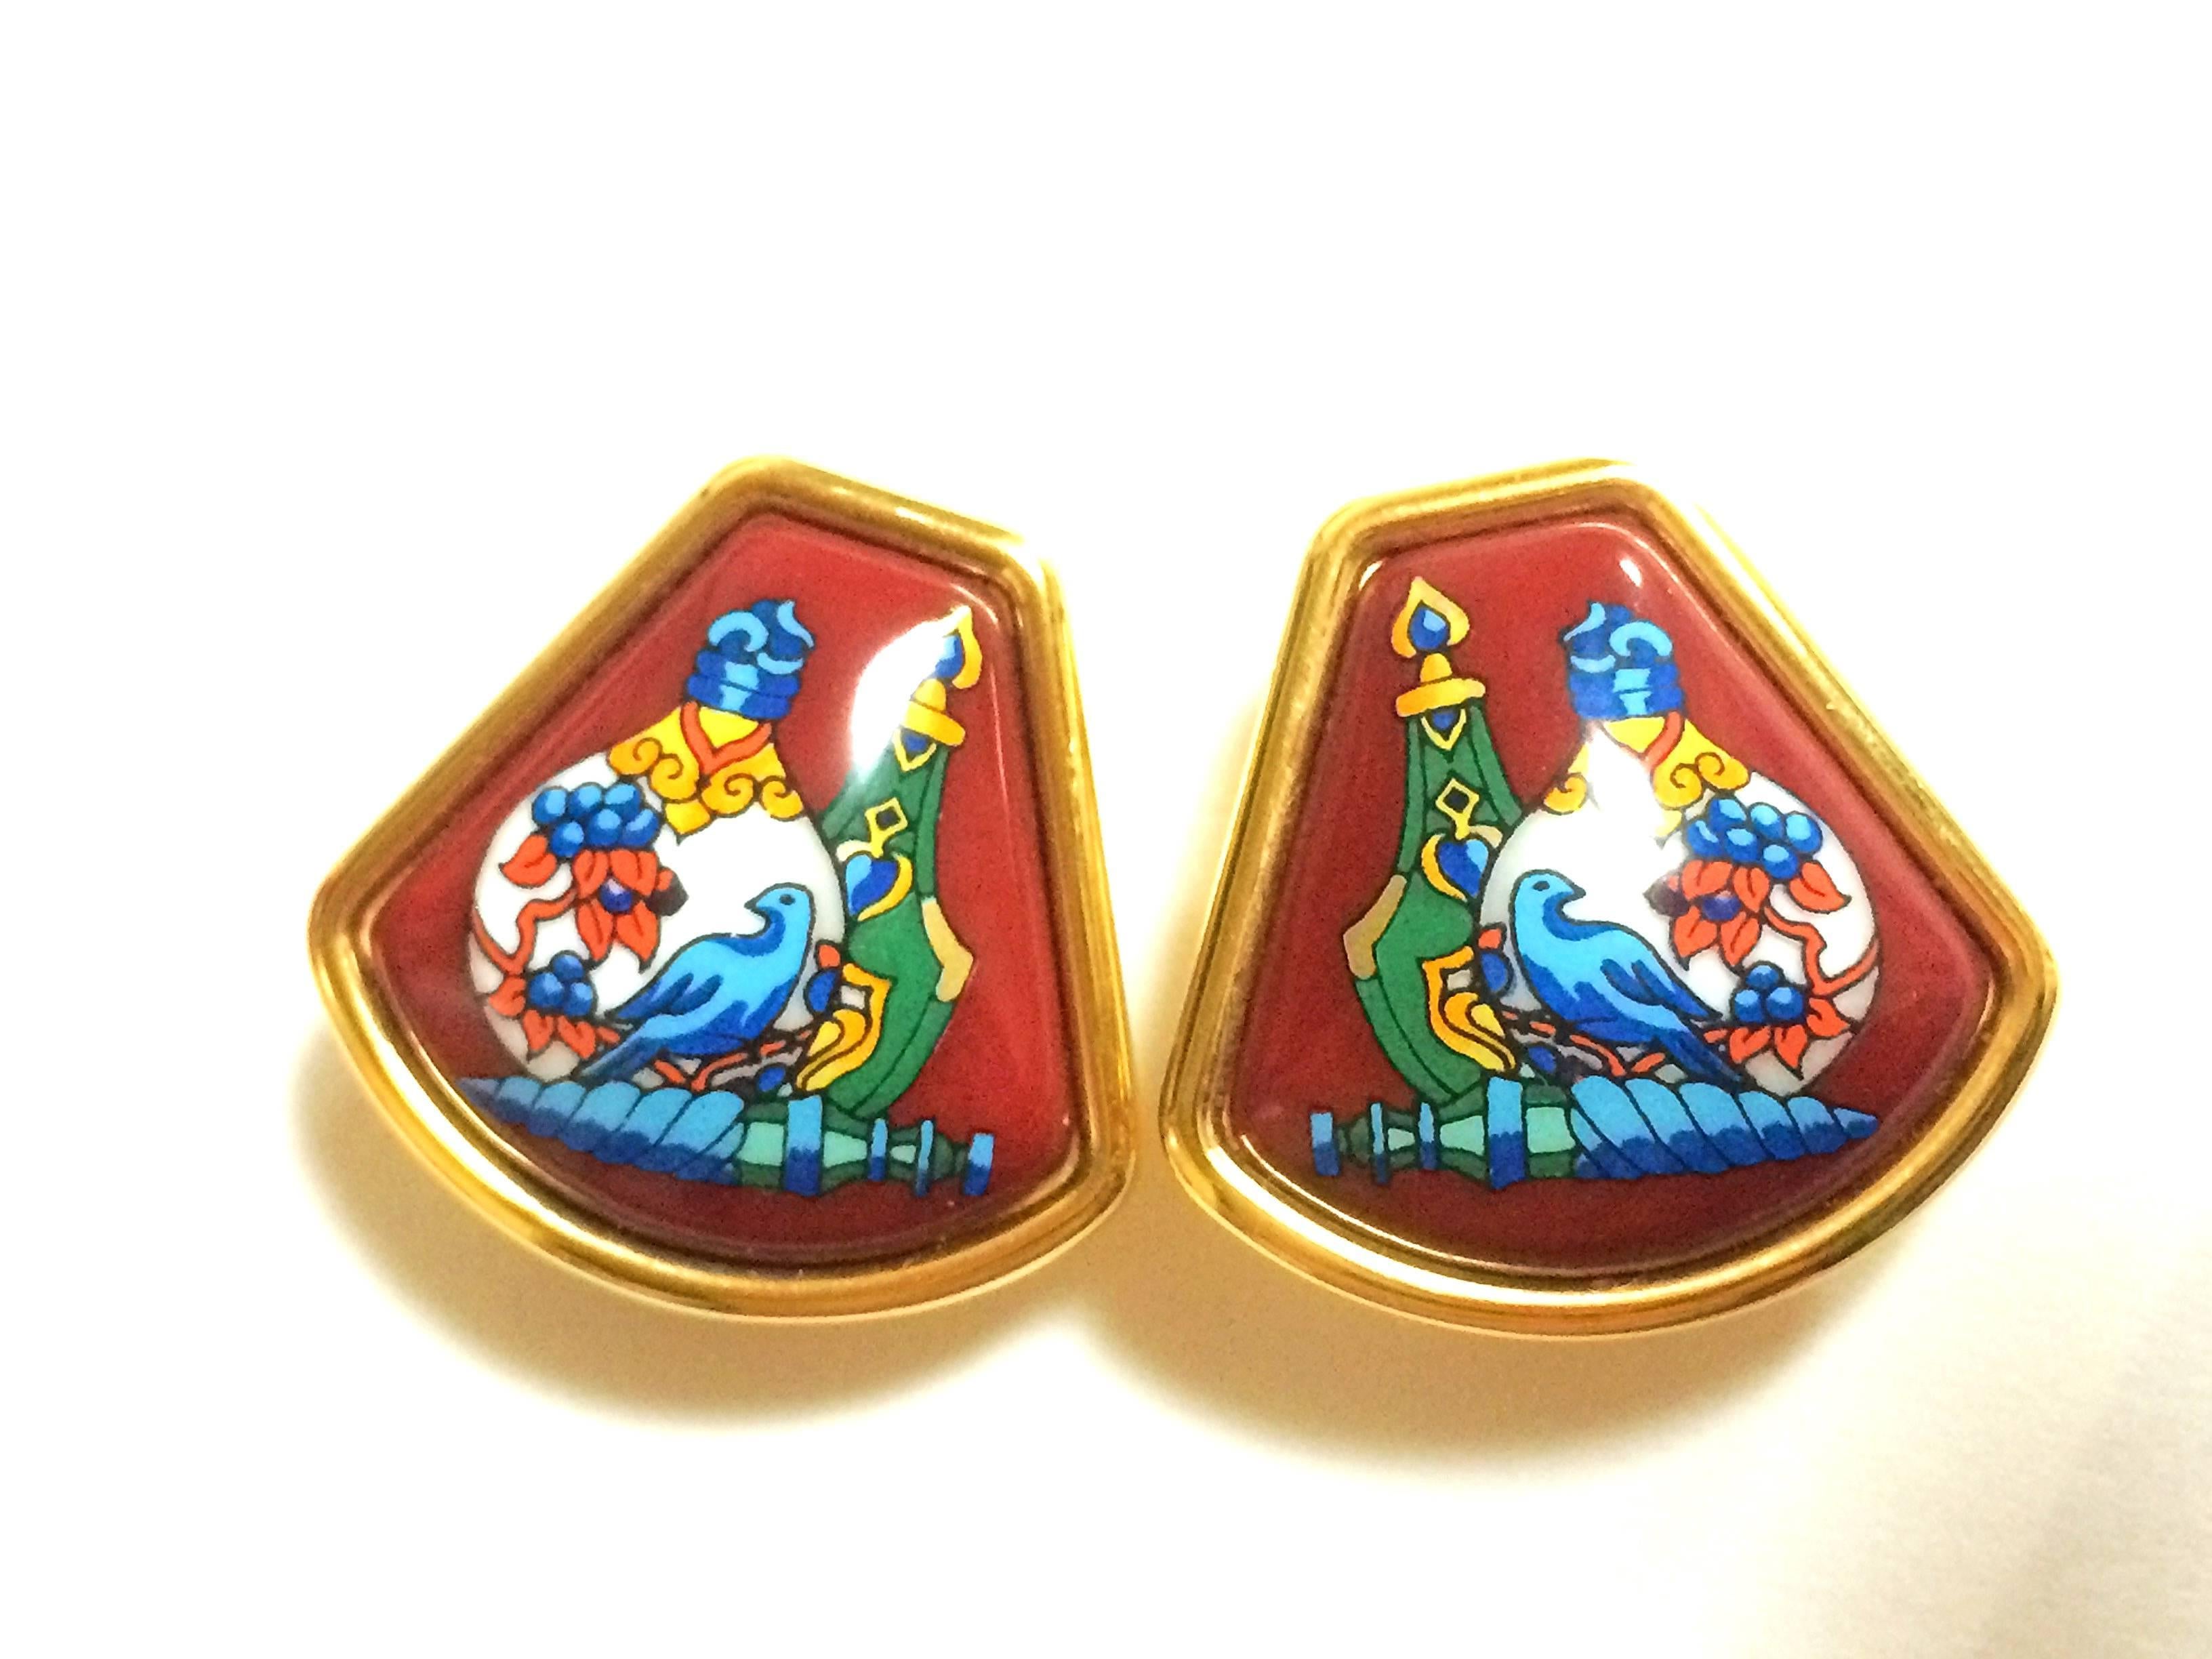 1990s. Vintage Hermes cloisonne golden earrings with colorful white, blue, green, pink perfume bottle design in wine. Fan shape.

****Hermes perfume bottle bangle is also available! ***

Fabulous earrings in HERMES's iconic cloisonne.
Excellent